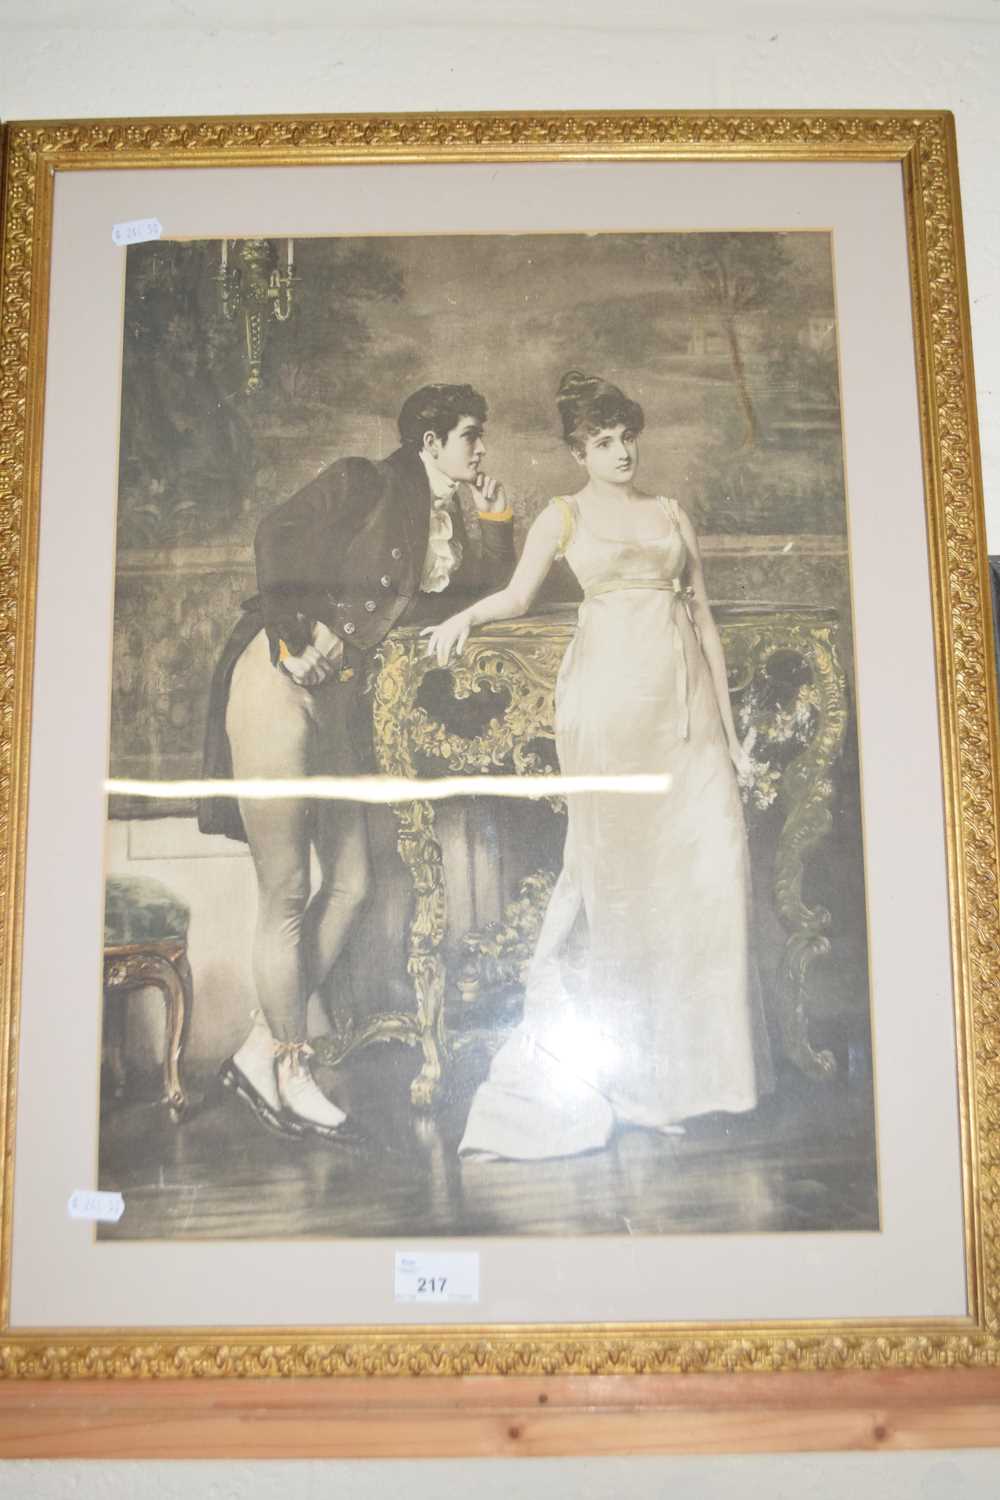 Monochrome print of a young couple